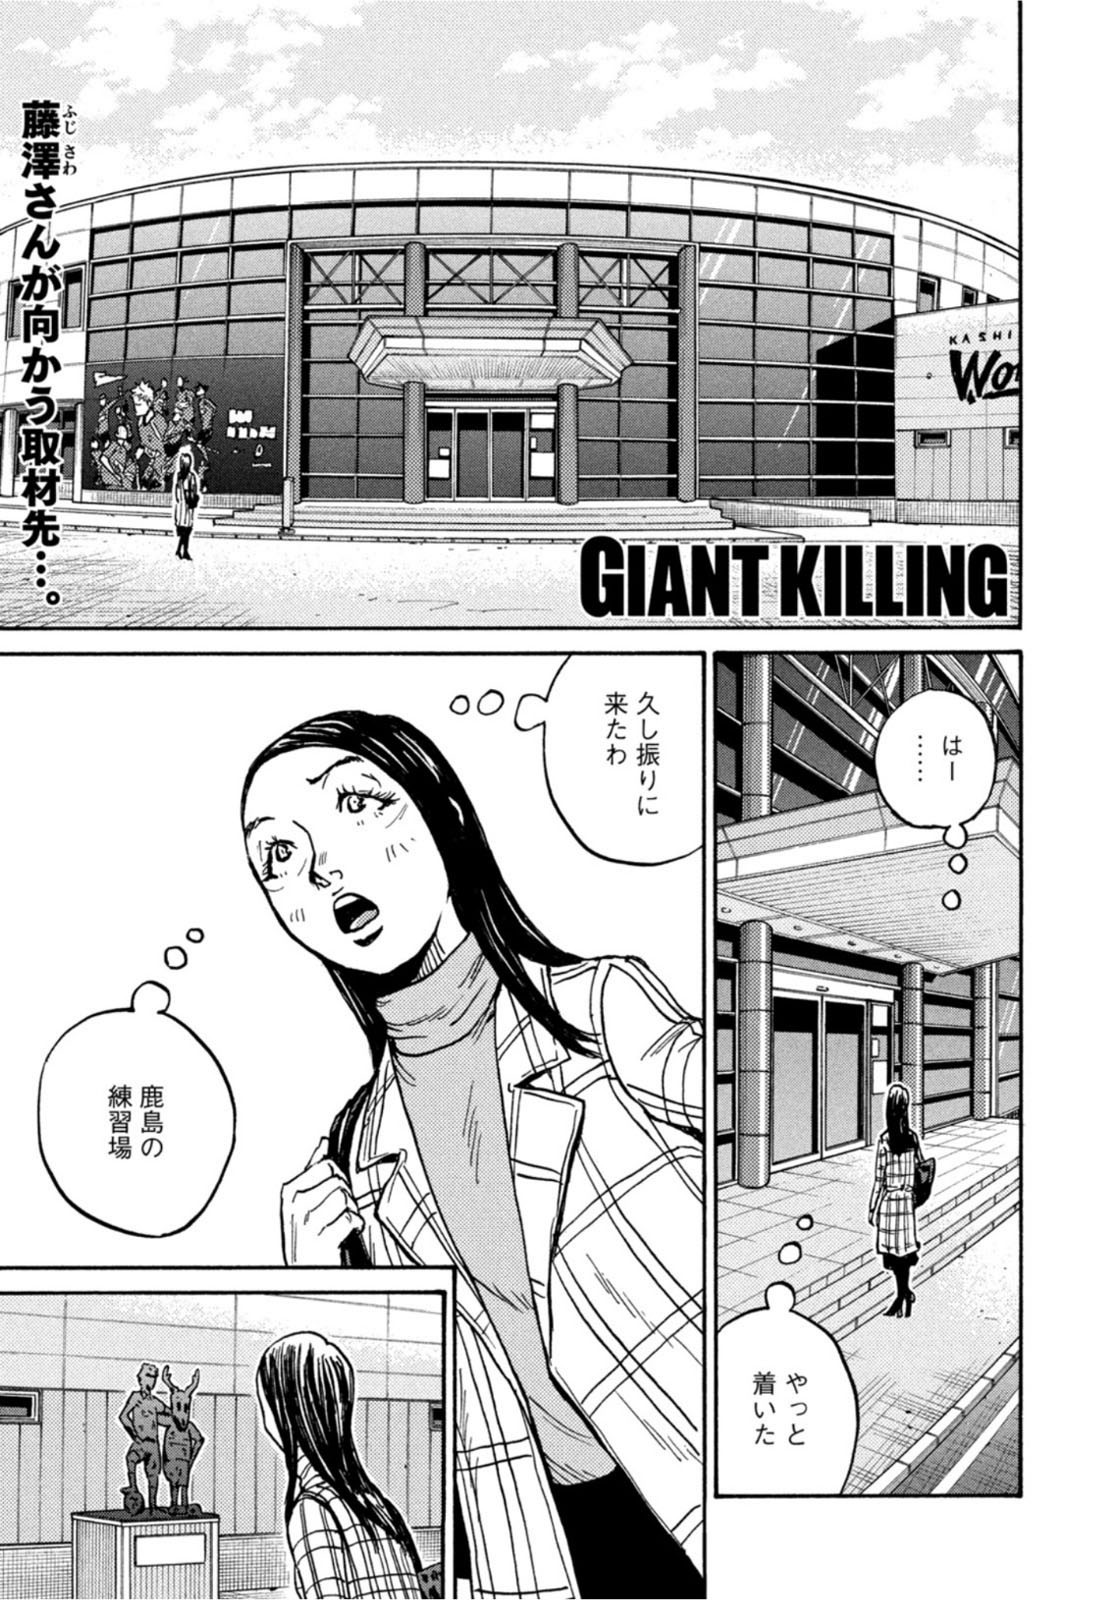 Giant Killing - Chapter 601 - Page 1